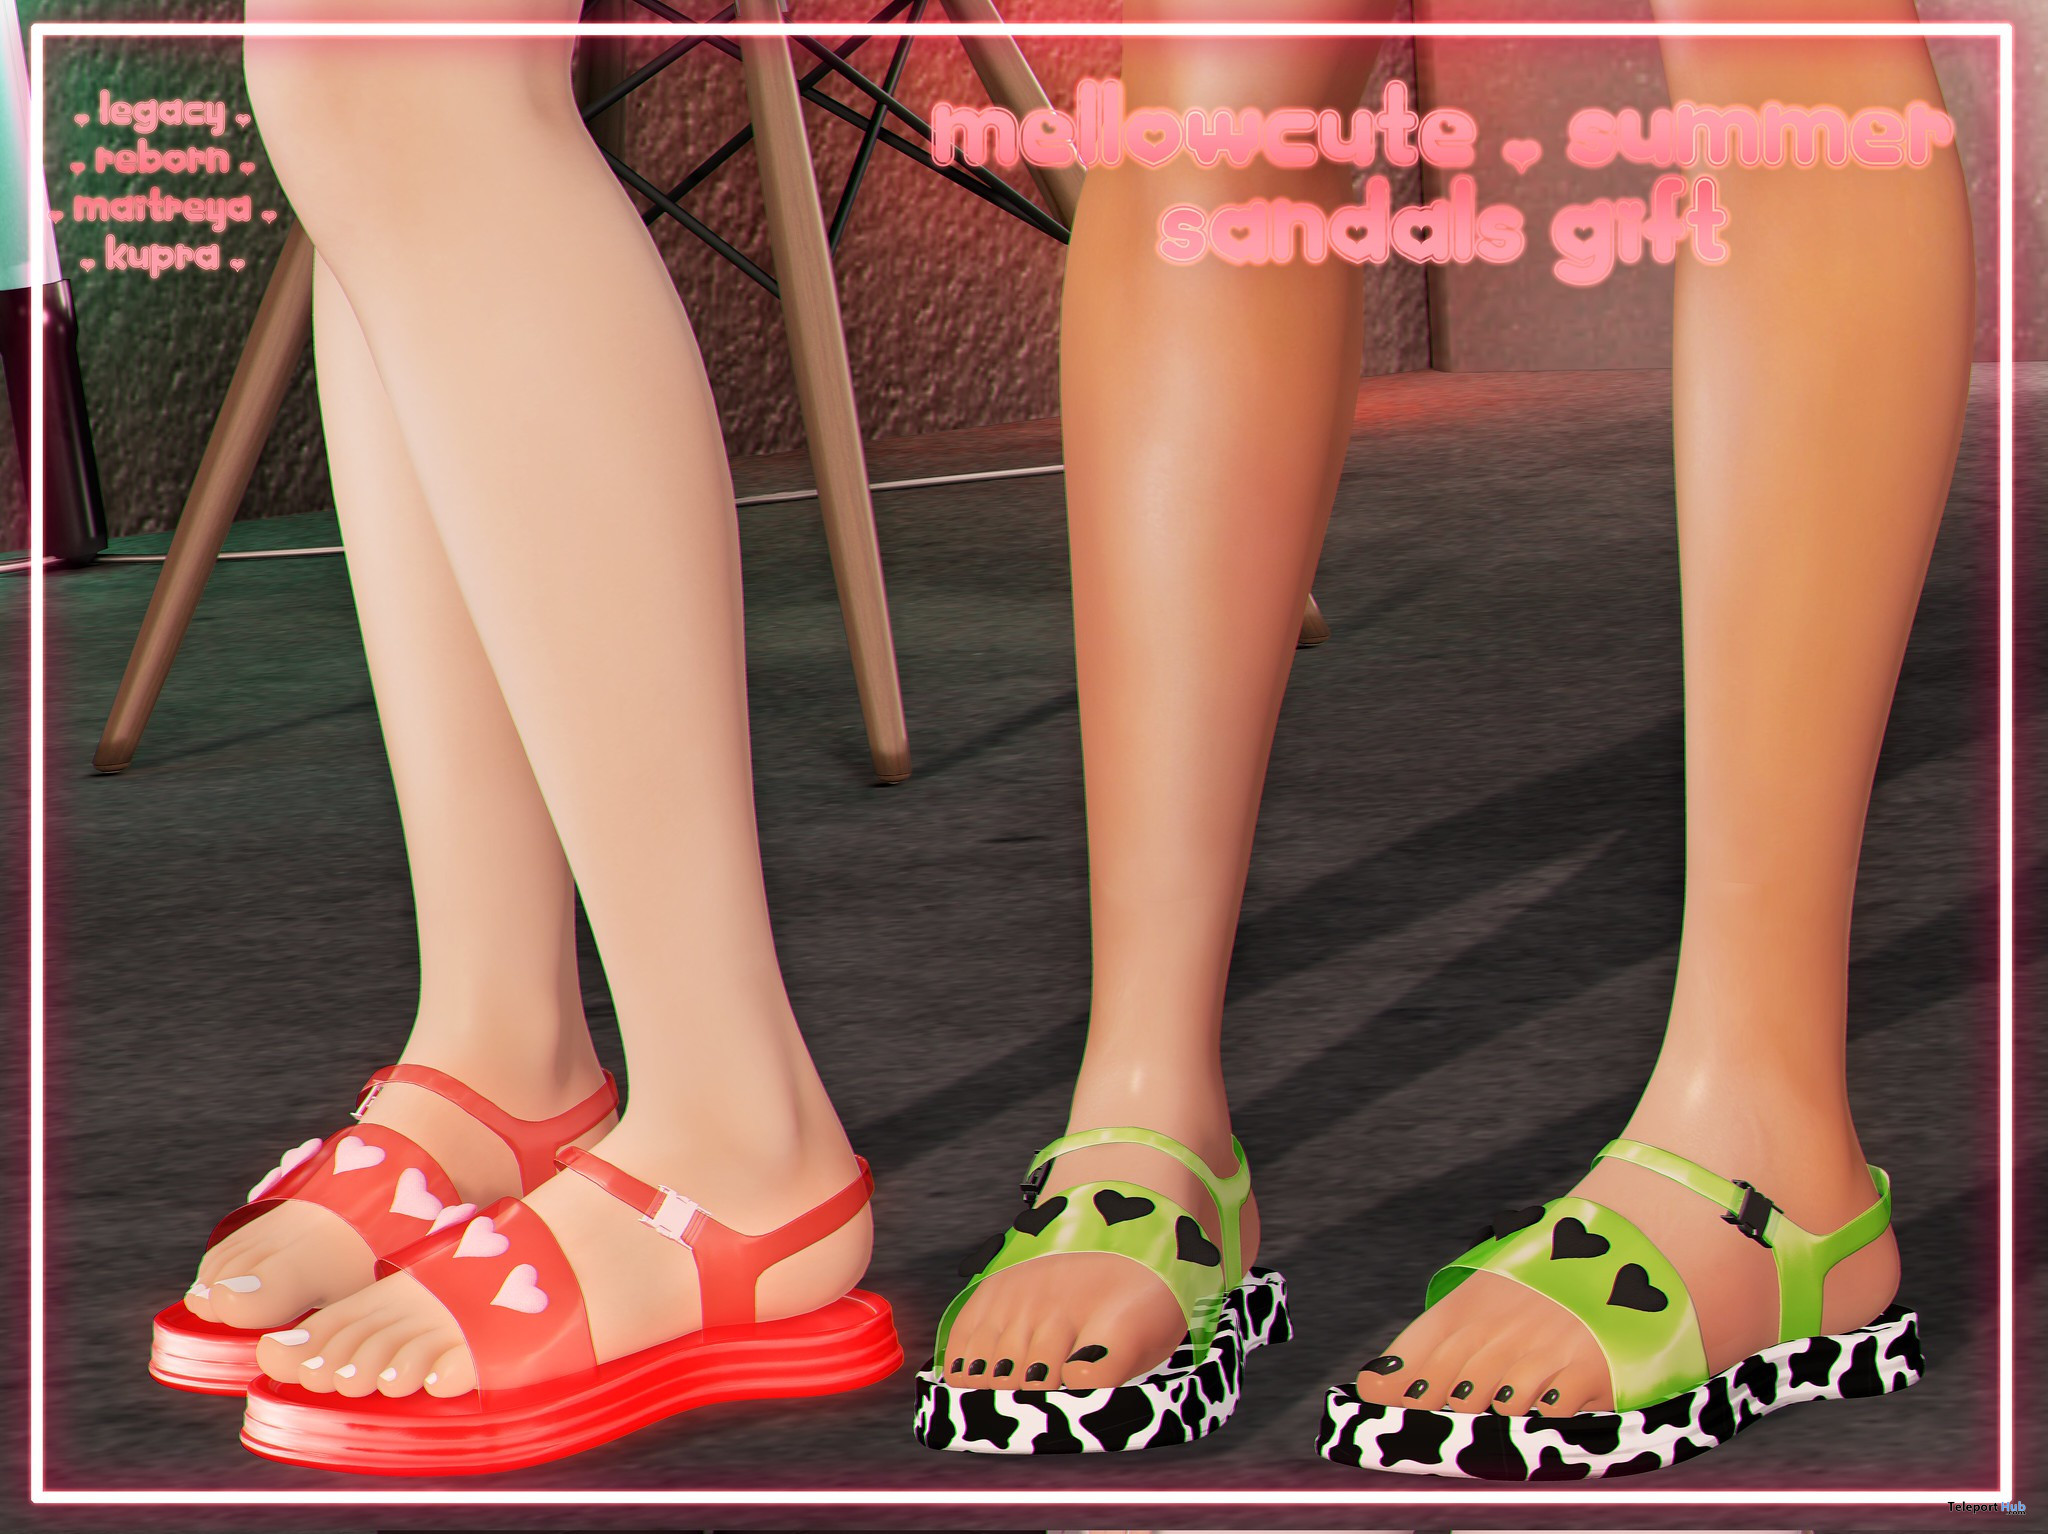 Summer Sandals August 2022 Group Gift by mellowcute - Teleport Hub - teleporthub.com